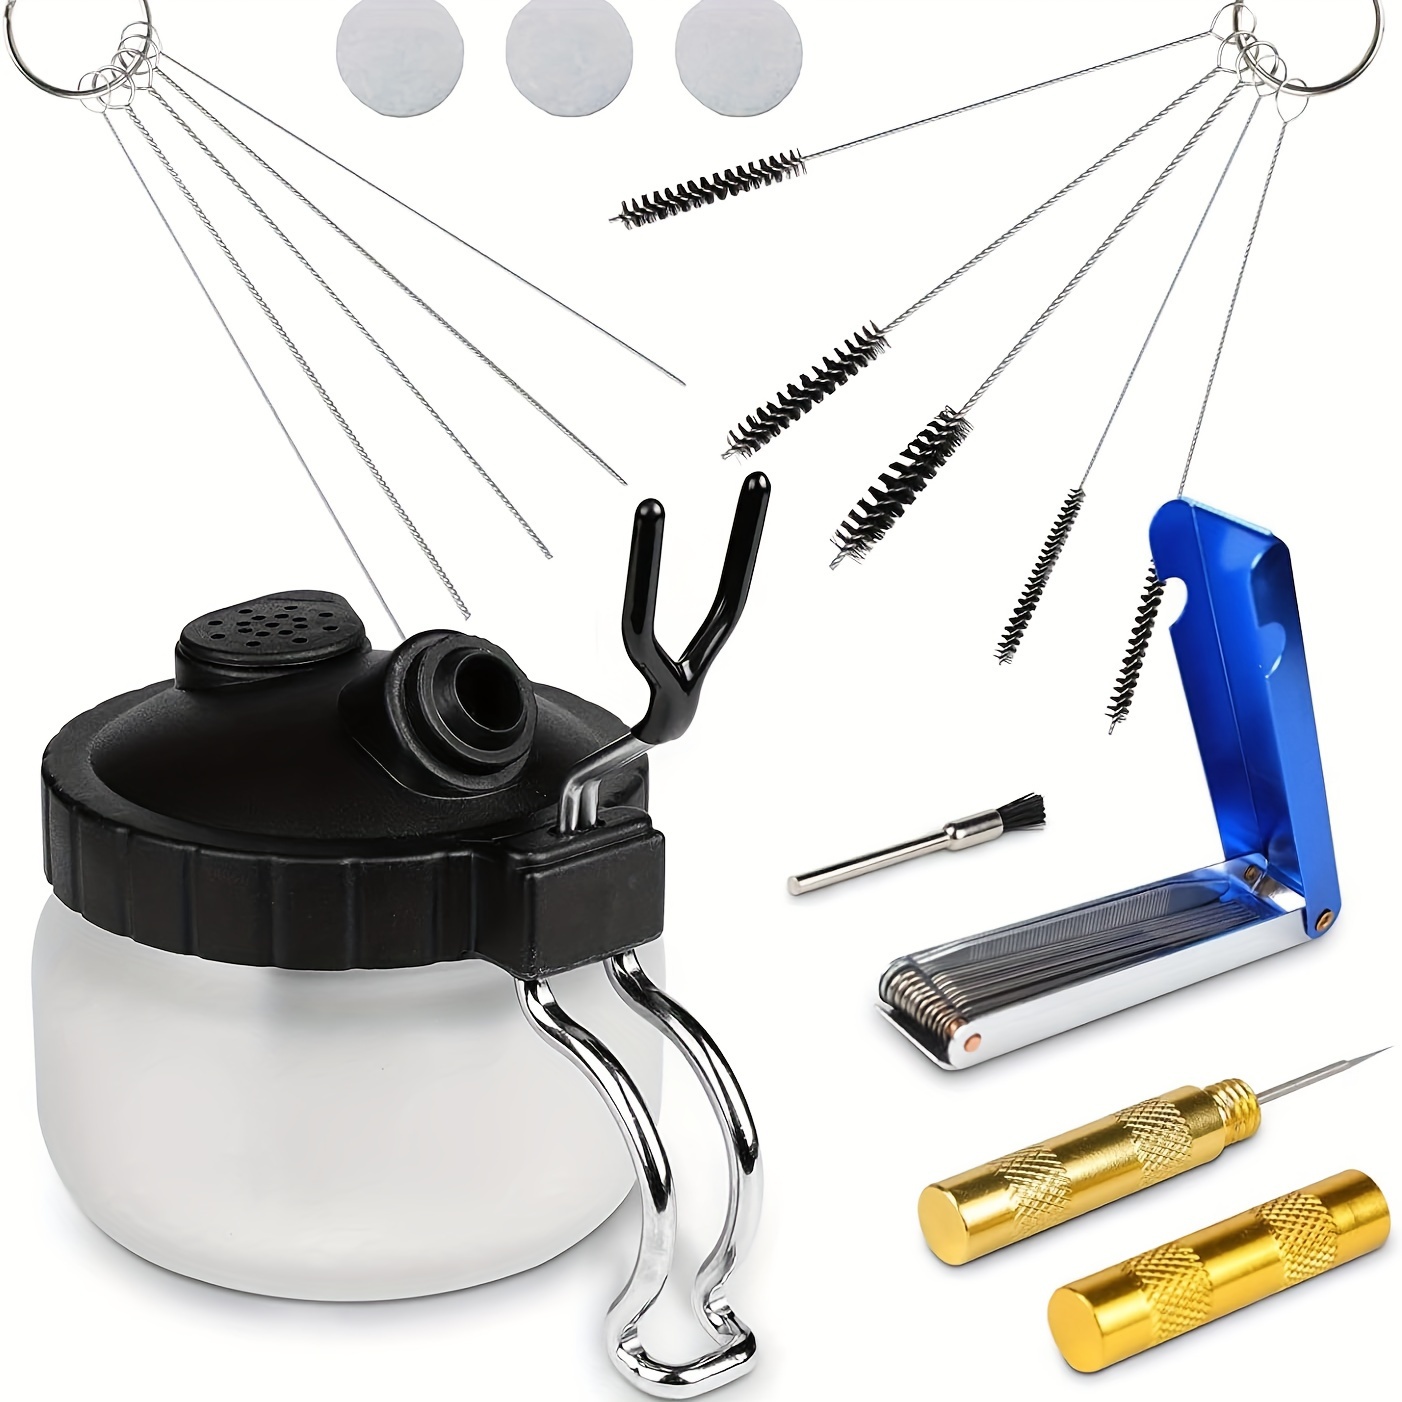 

Airbrush 13 Piece Airbrush Cleaning Kit - Airbrush Clean Pot Glass Cleaning Jar With Holder, 5pc Cleaning Needles, 5pc Cleaning Brushes, 1 Wash Needle, Mini Brush Head